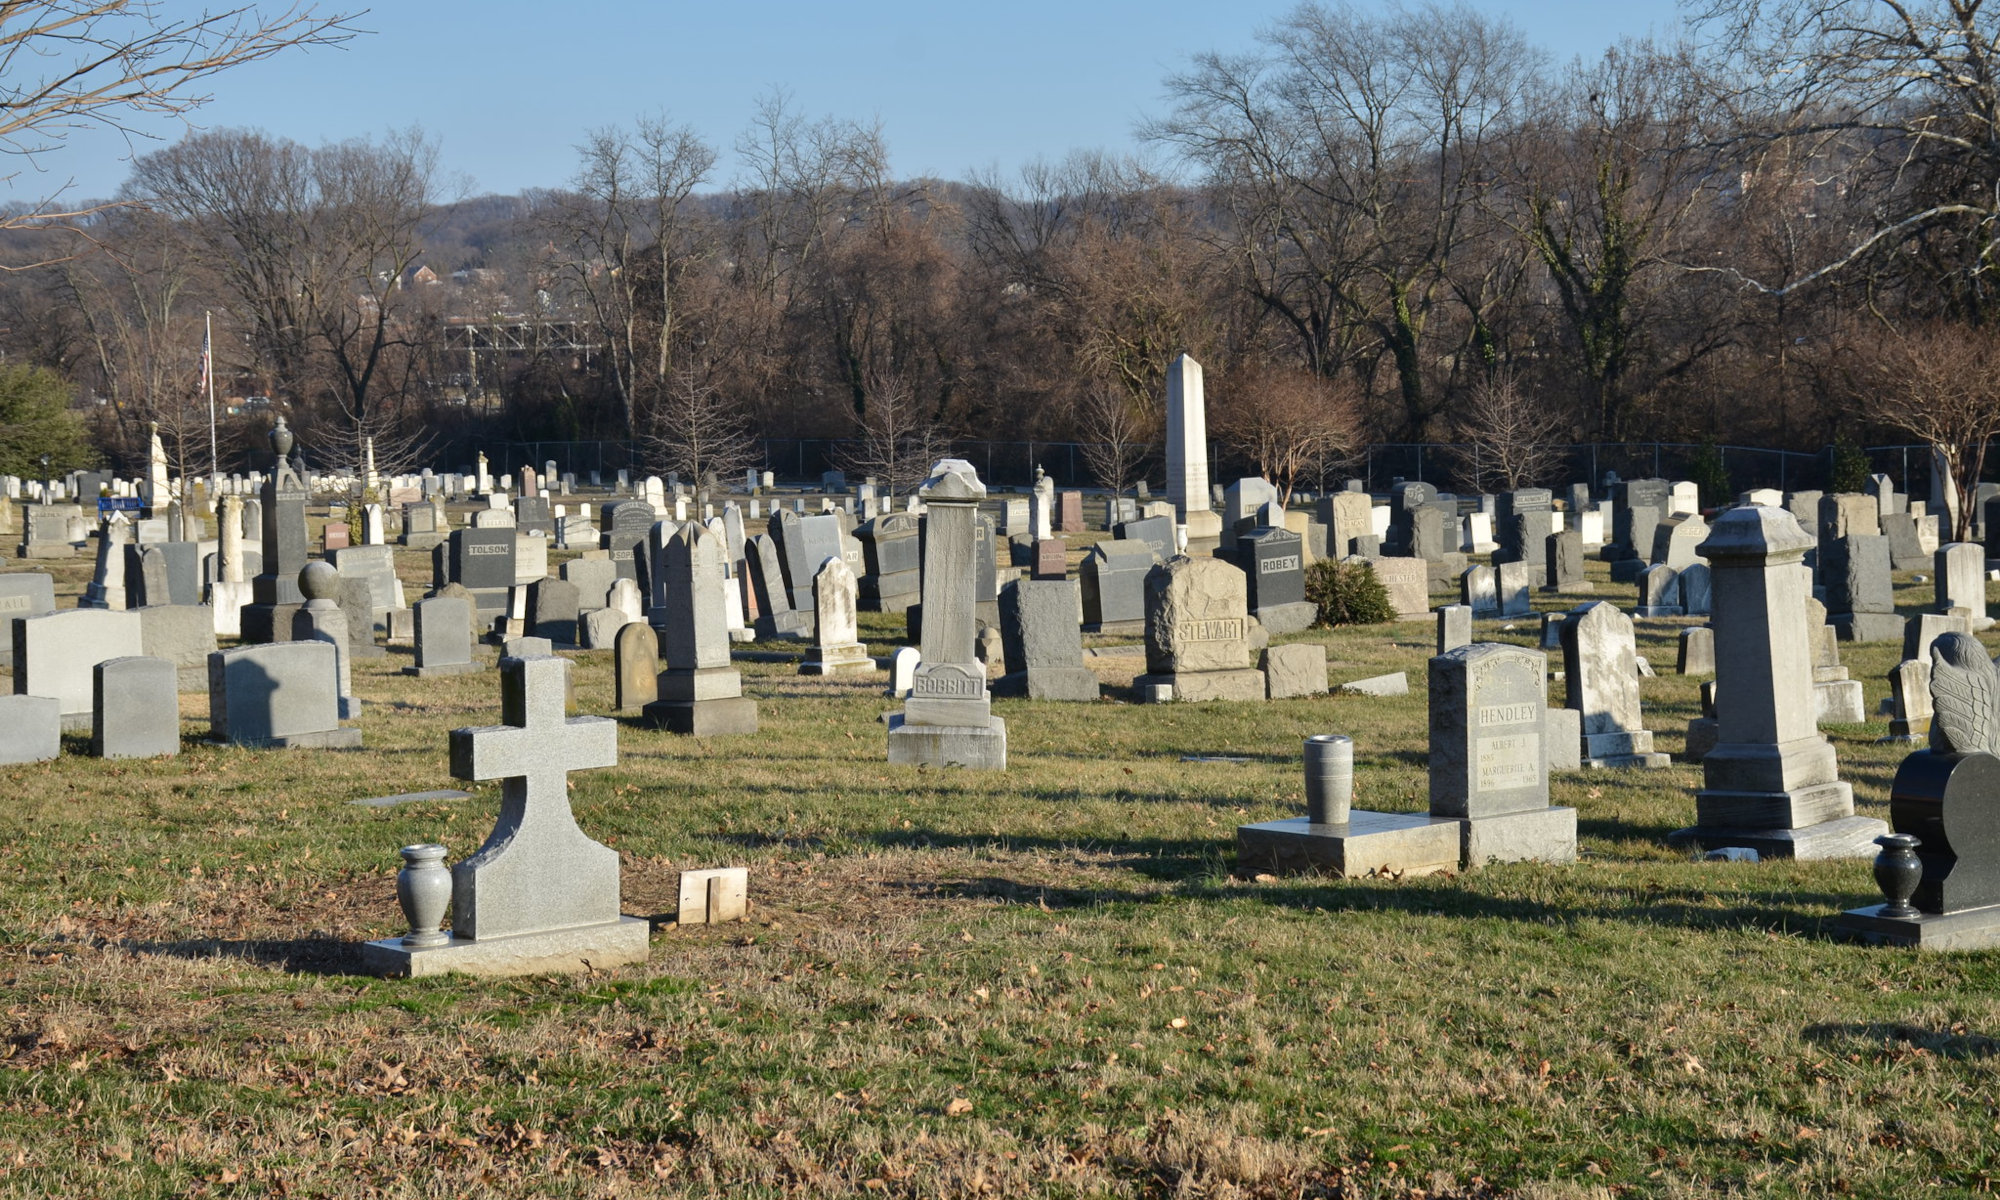 The area around the Hawks in Congressional Cemetery